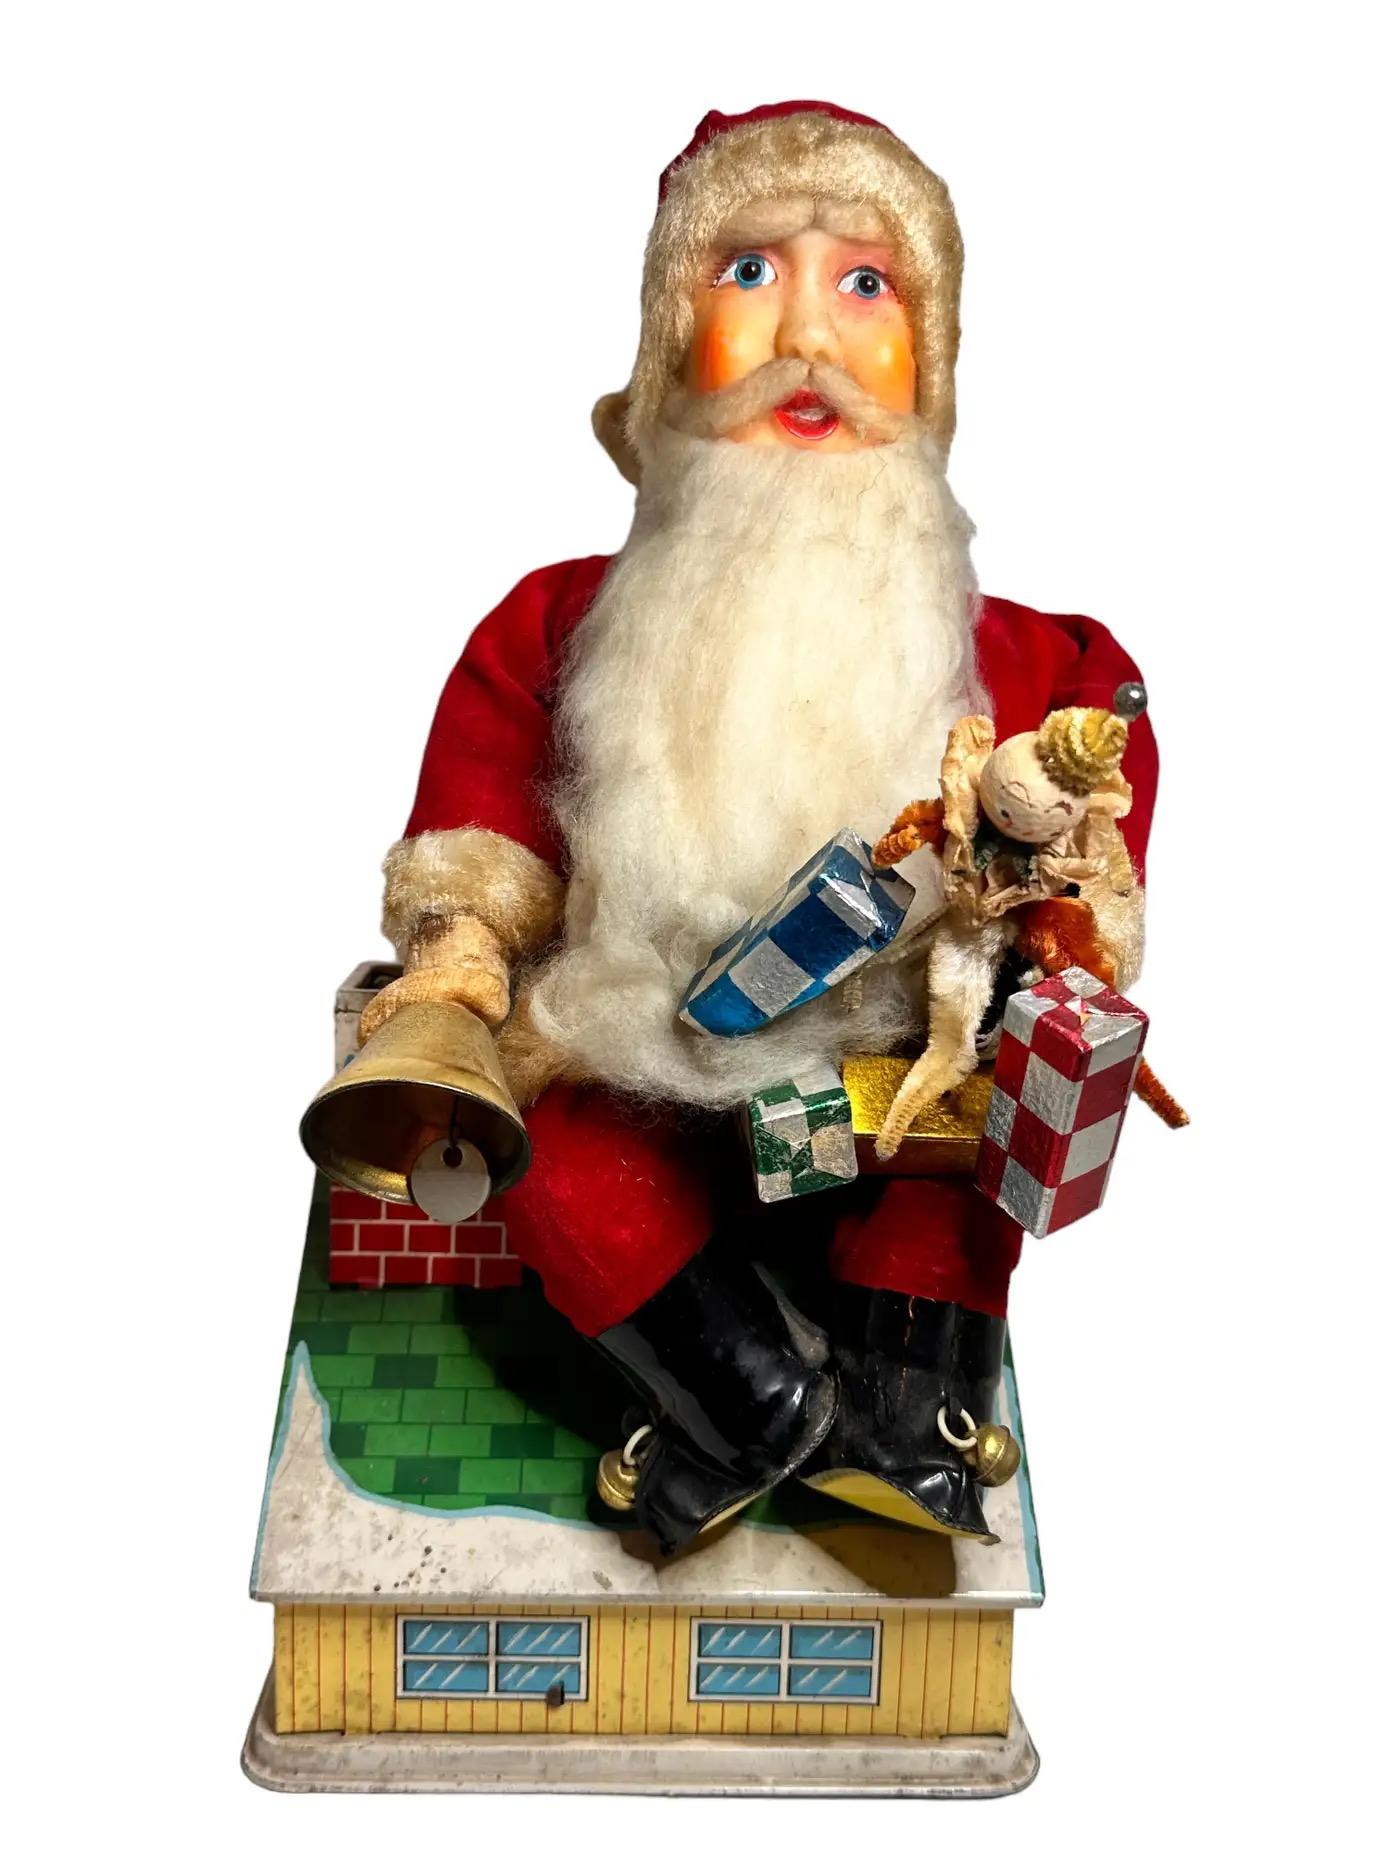 Gorgeous vintage sheet metal, plastic and fabric made money bank. Operated by switch or upon deposit of coins. Functions include - flashing eyes, head moves left-right, arms move up/down and bell rings. Santa holds small foil-wrapped Christmas